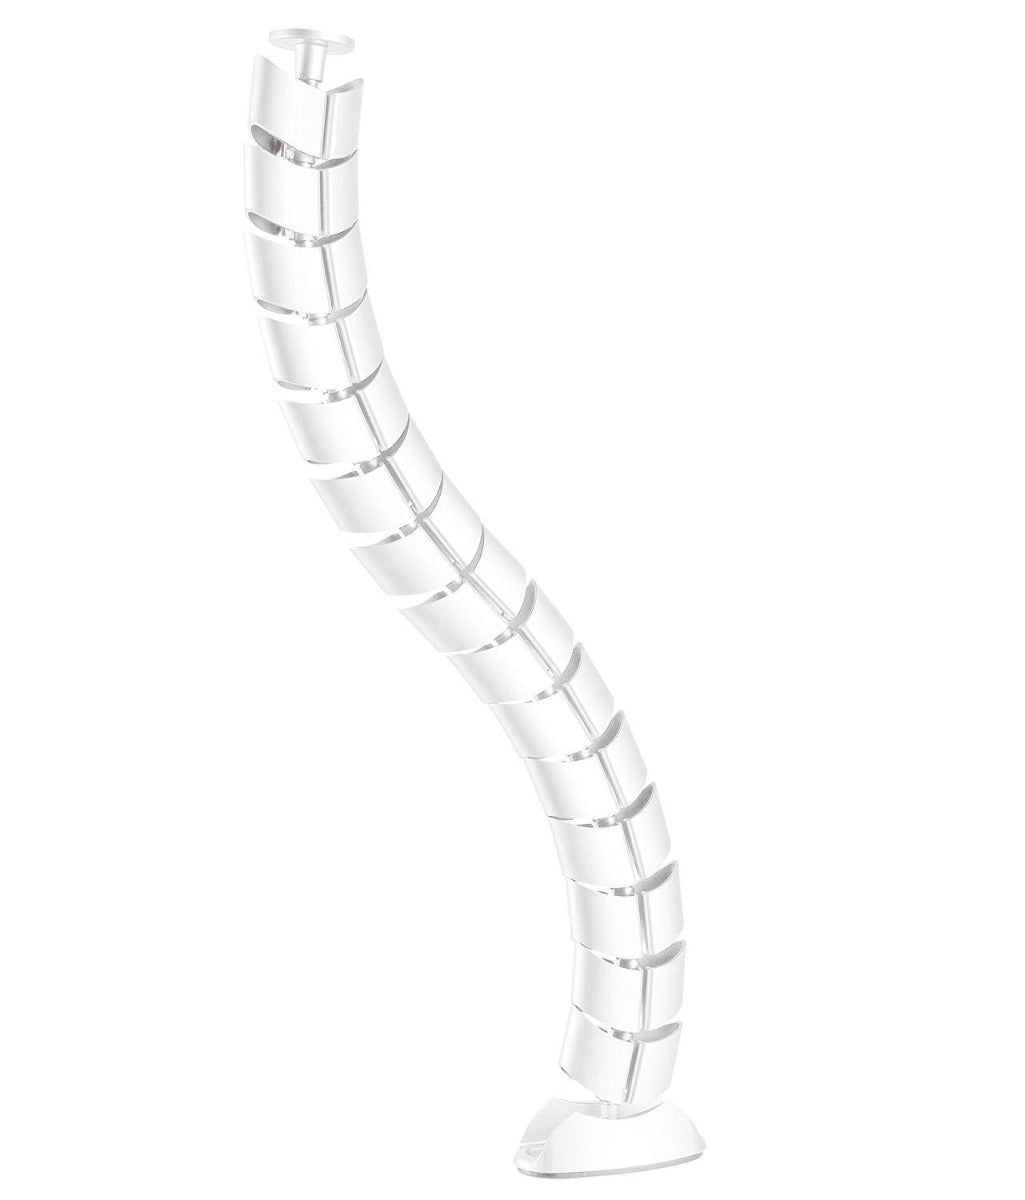 Cable Management Spine in White - OOF-P09 Huddersfield